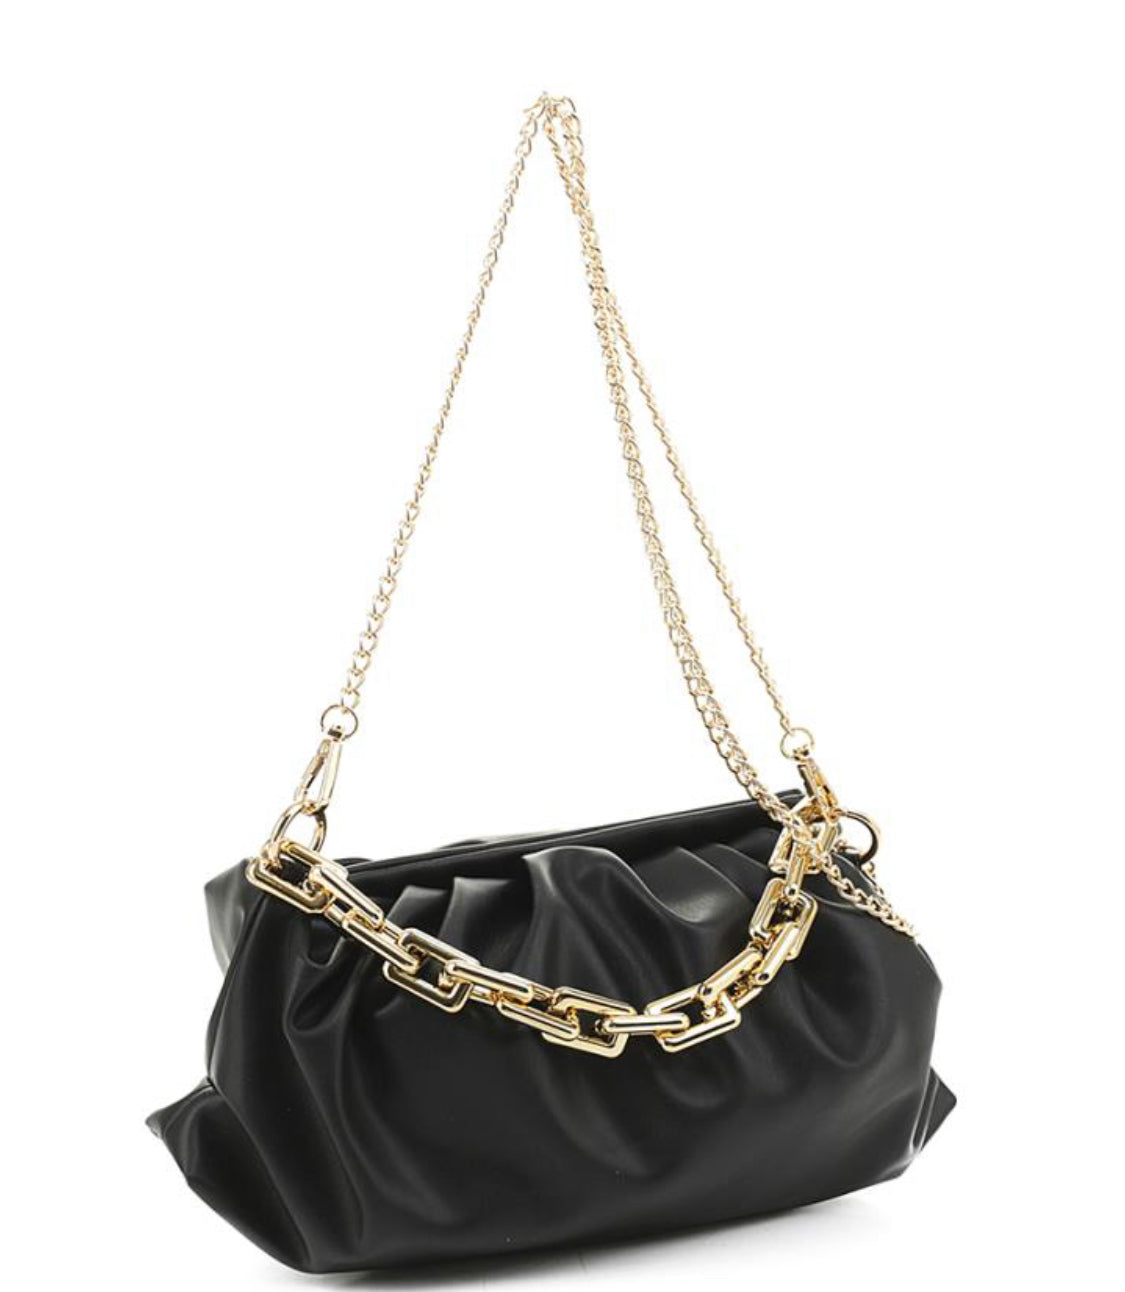 Ms. Convertible Chain Link Bag